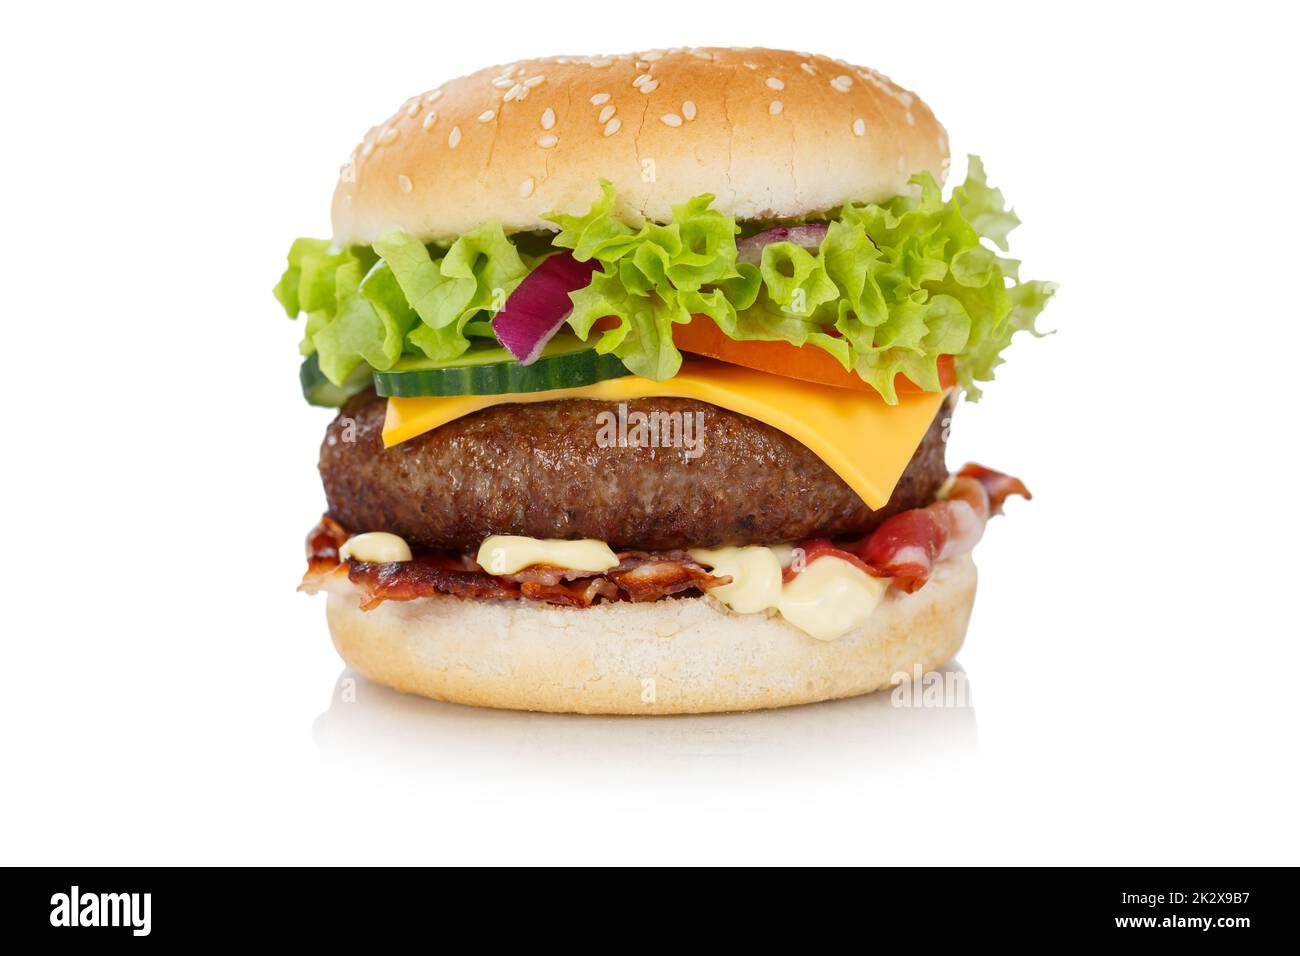 Hamburger Cheeseburger fastfood fast food isolated on a white background burger Stock Photo